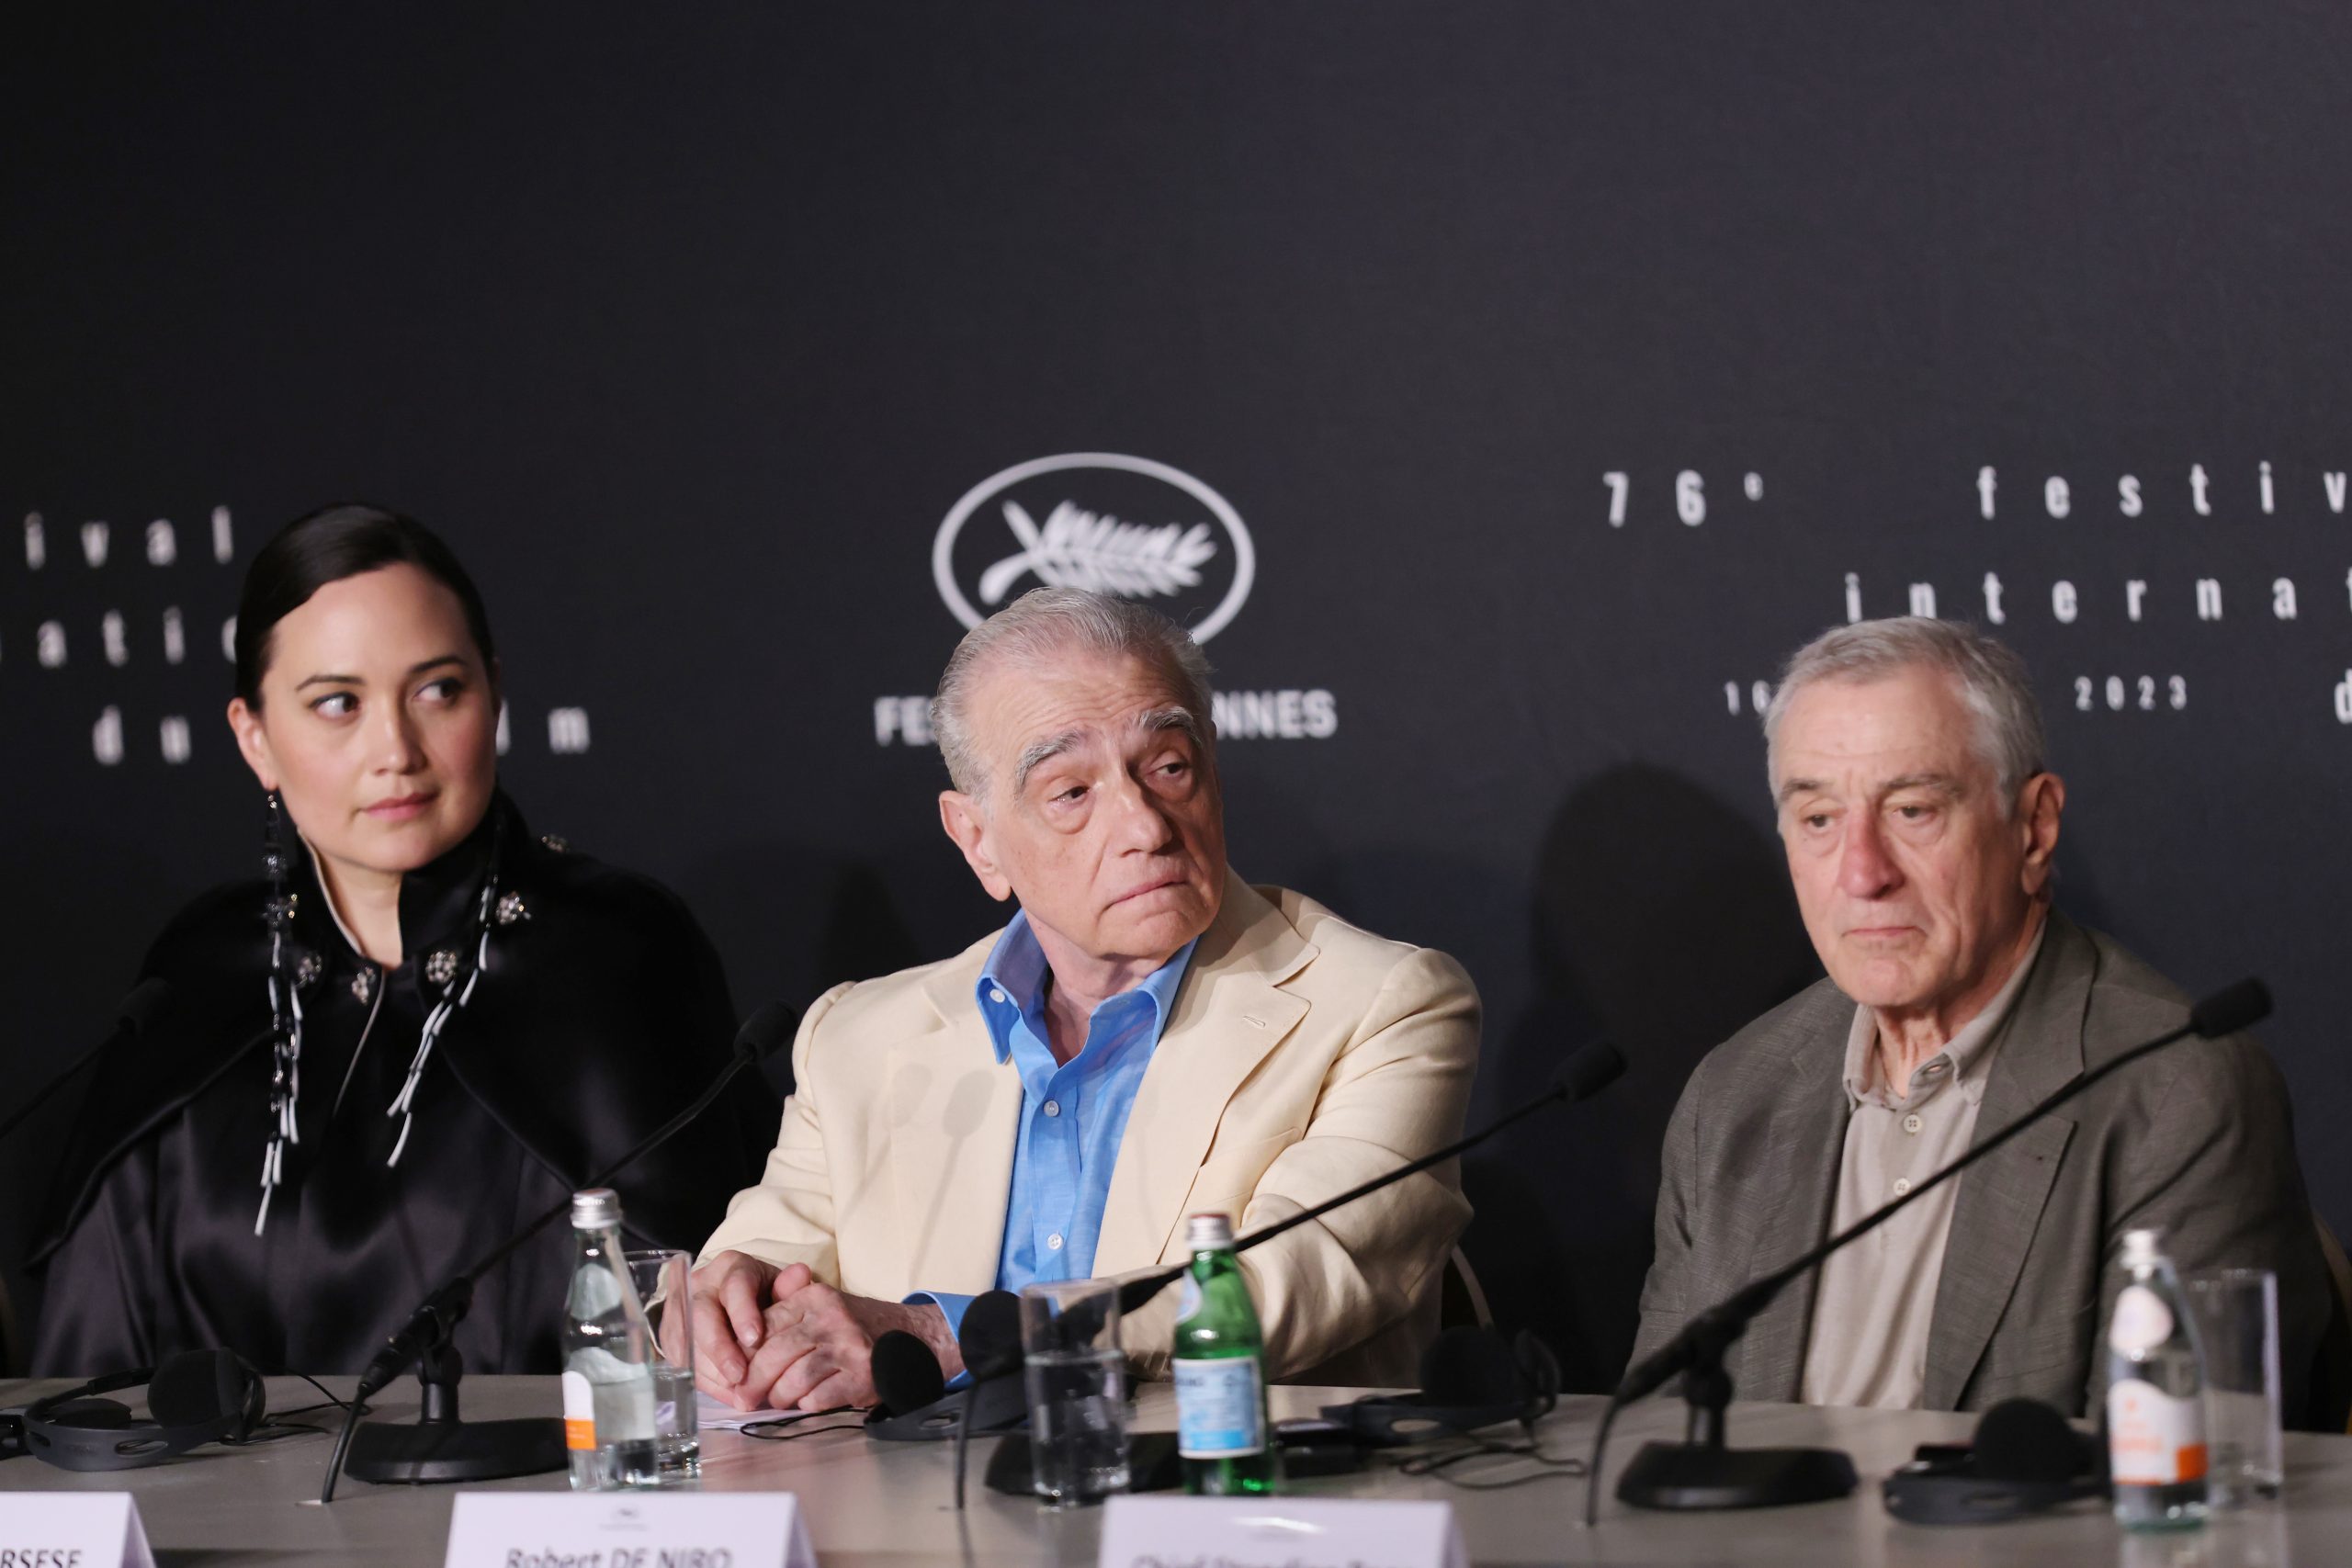 Lily Gladstone, Director Martin Scorsese and Robert De Niro attend the "Killers of the Flower Moon" press conference at the 76th annual Cannes Film Festival